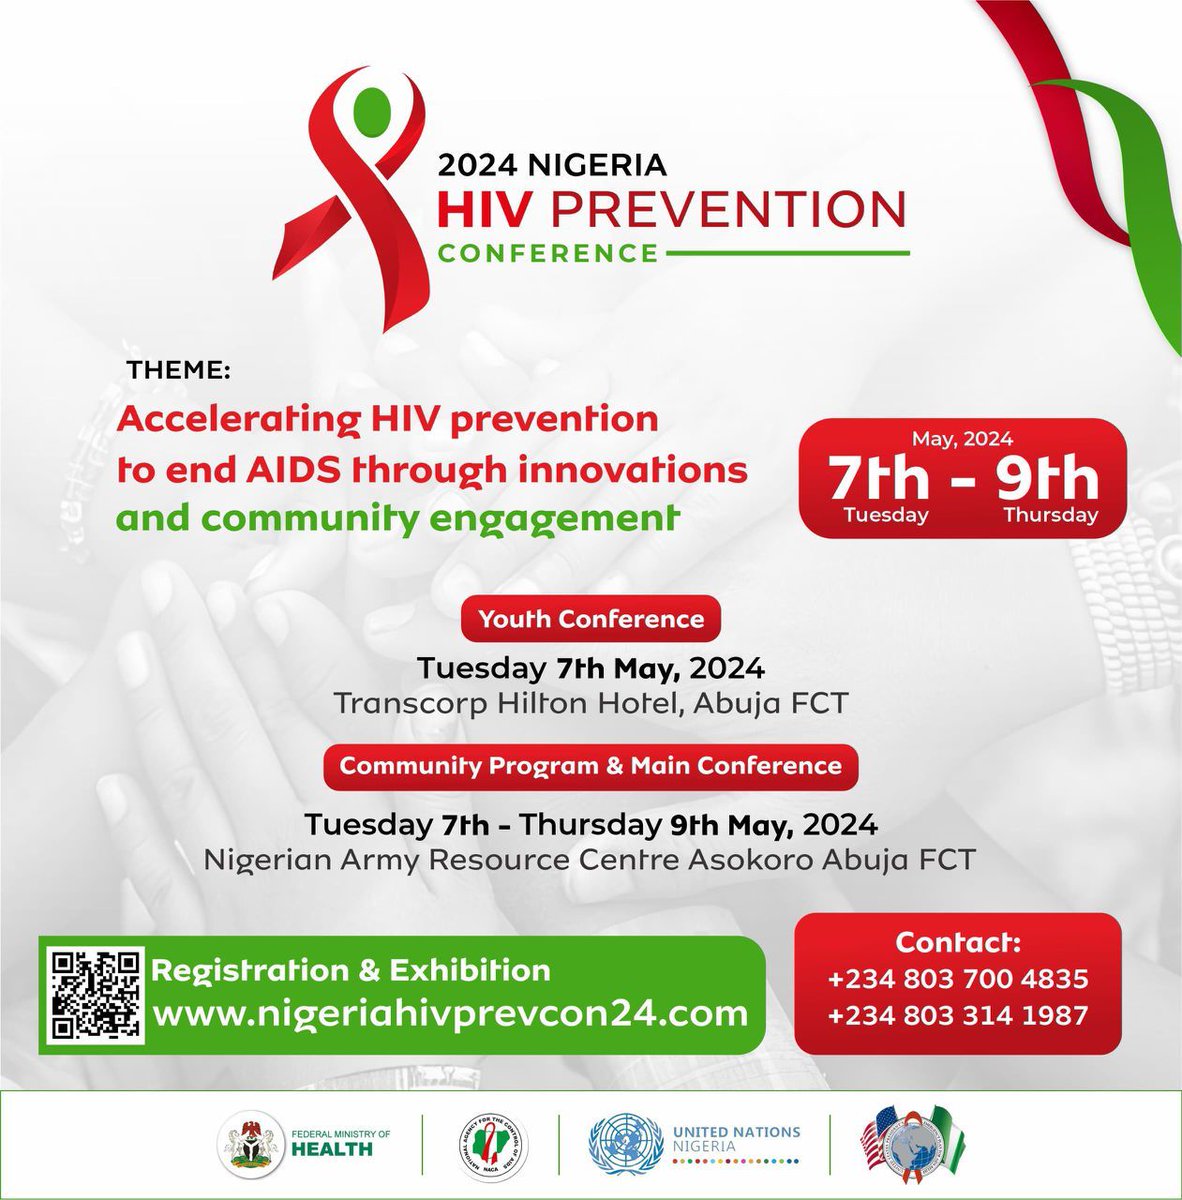 The 2024 HIV Prevention Conference is almost here and the Registration is still going on. Register here nigeriahivprevcon24.com/registration/

#AYP4Change
#BeAChangeAgent